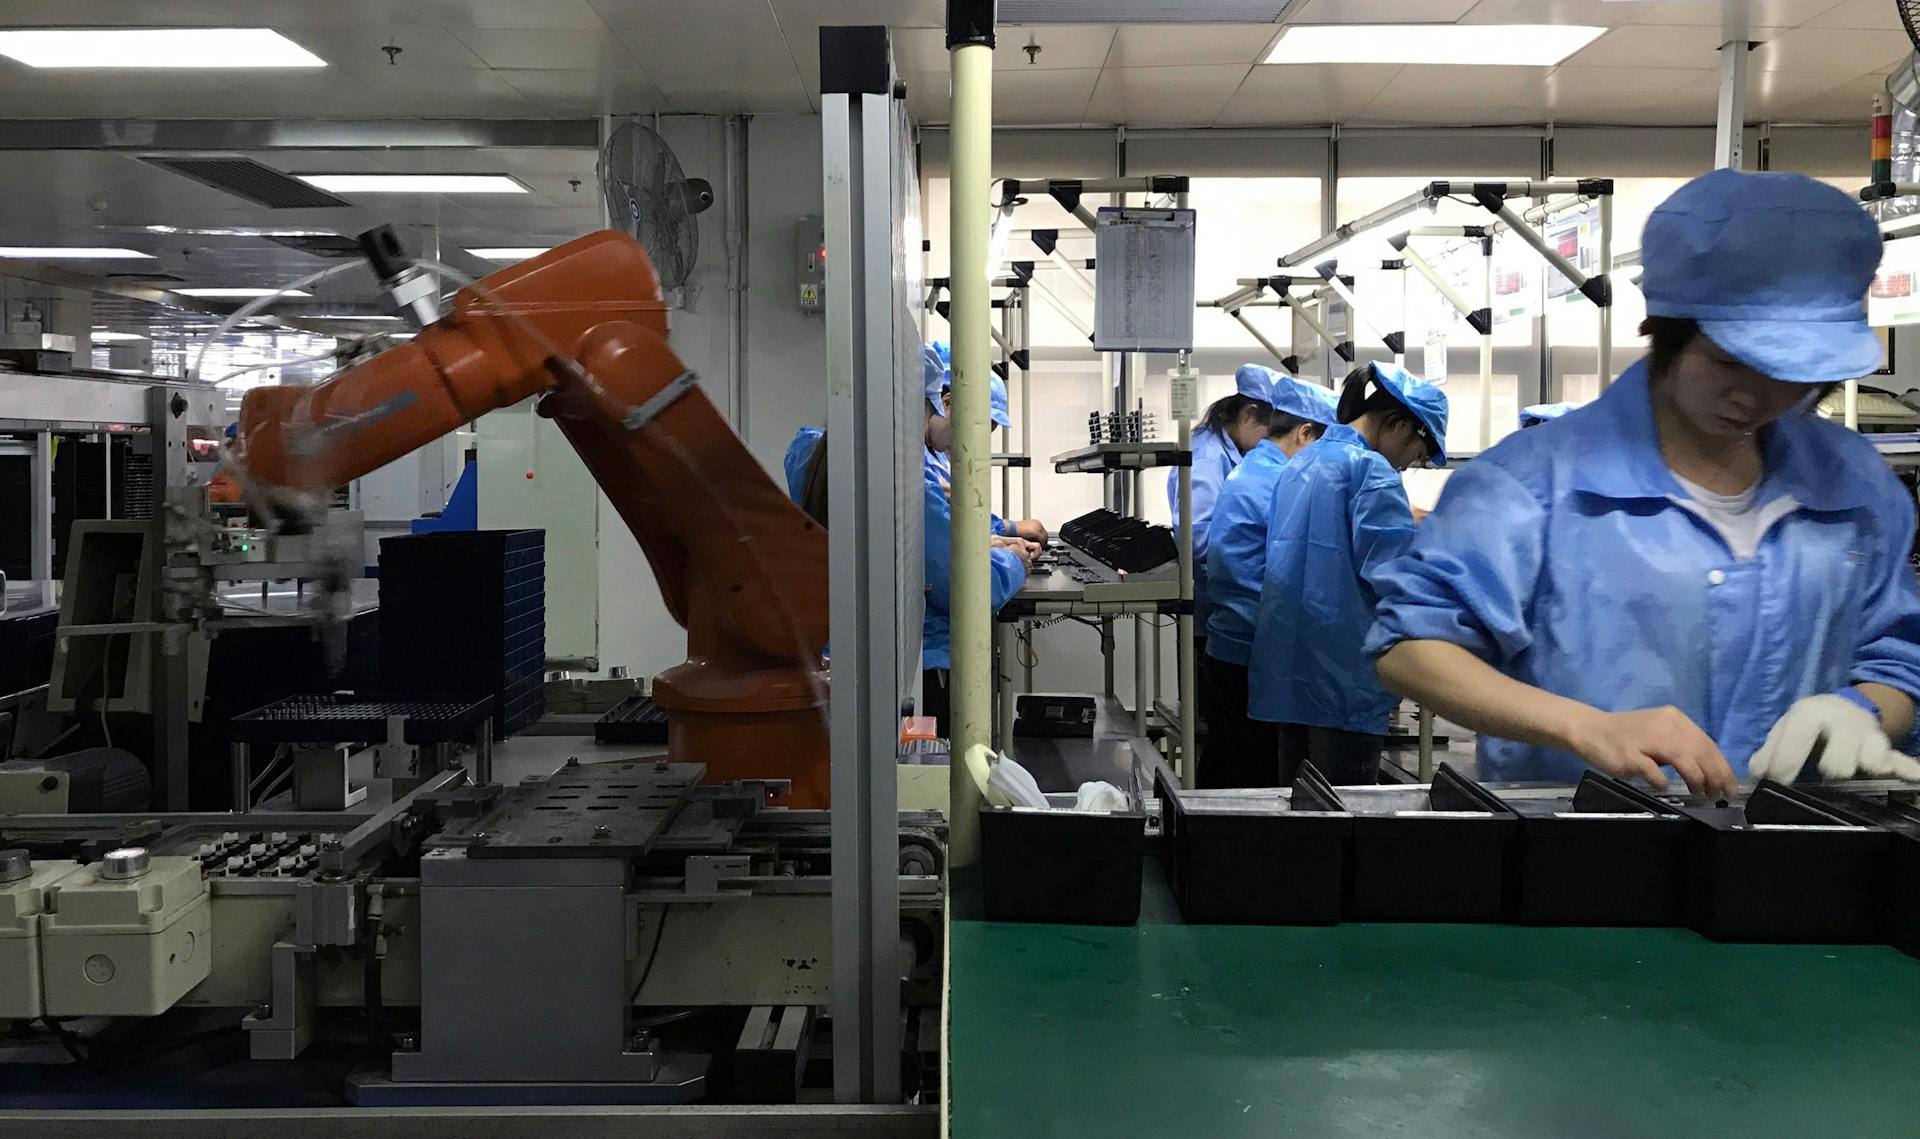 Human and robotic workers in the Rapoo factory, Shenzhen (2017). Photo: Merve Bedir 